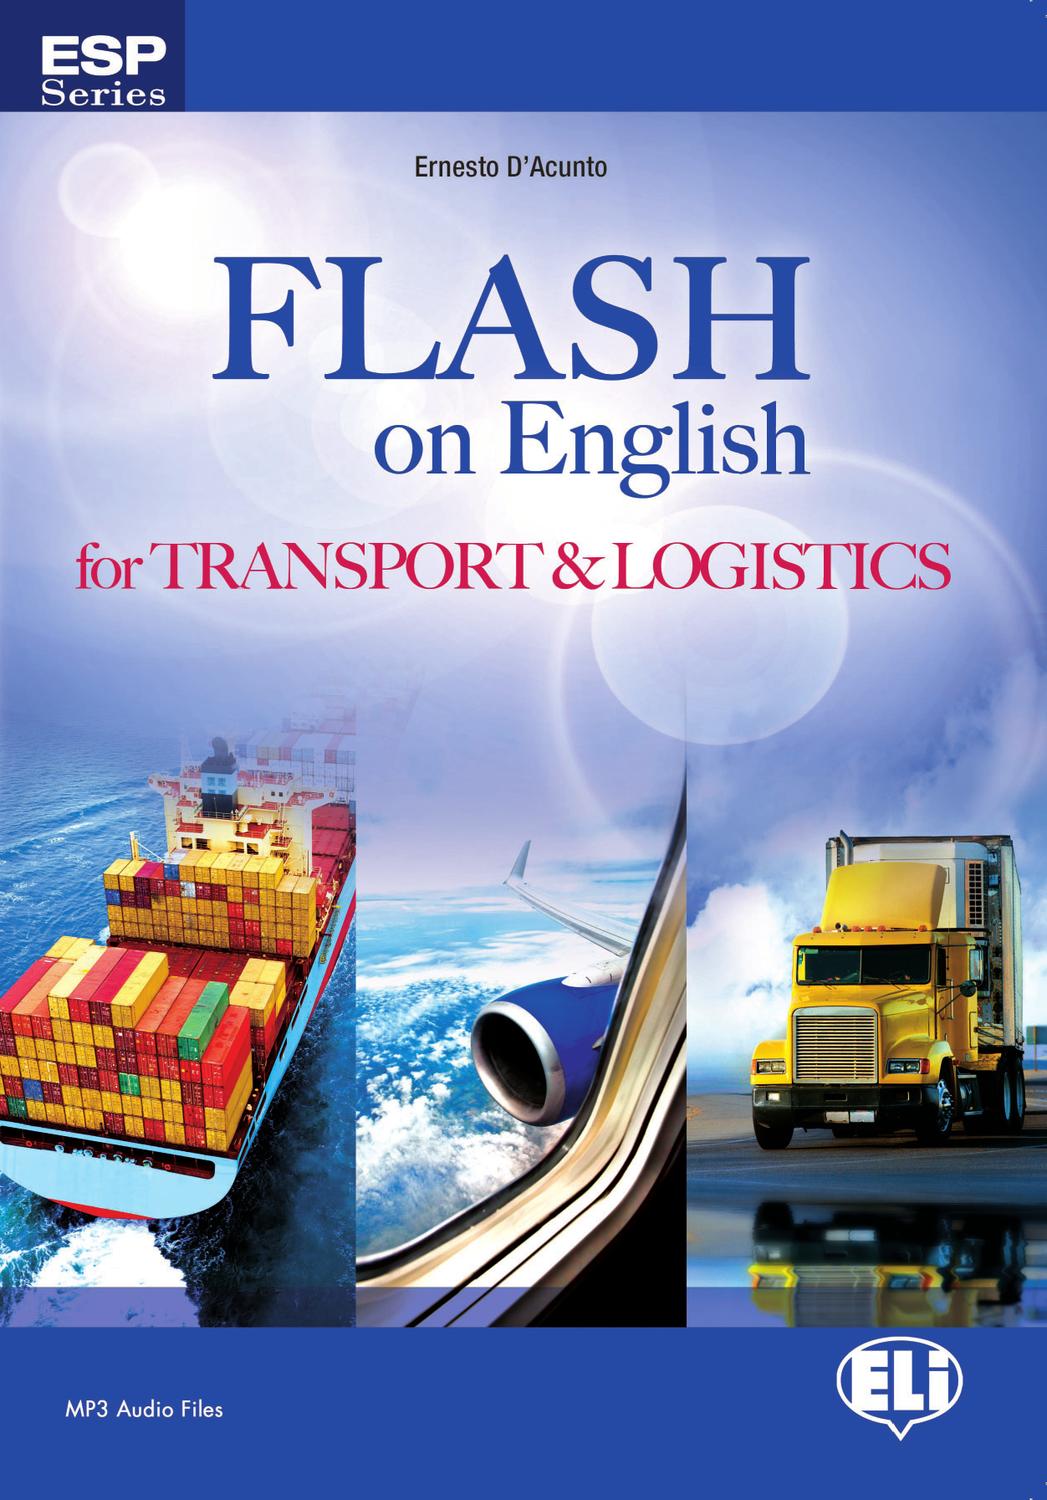 TRANSPORT AND LOGISTICS (E.S.P. FLASH ON ENGLISH FOR) Book